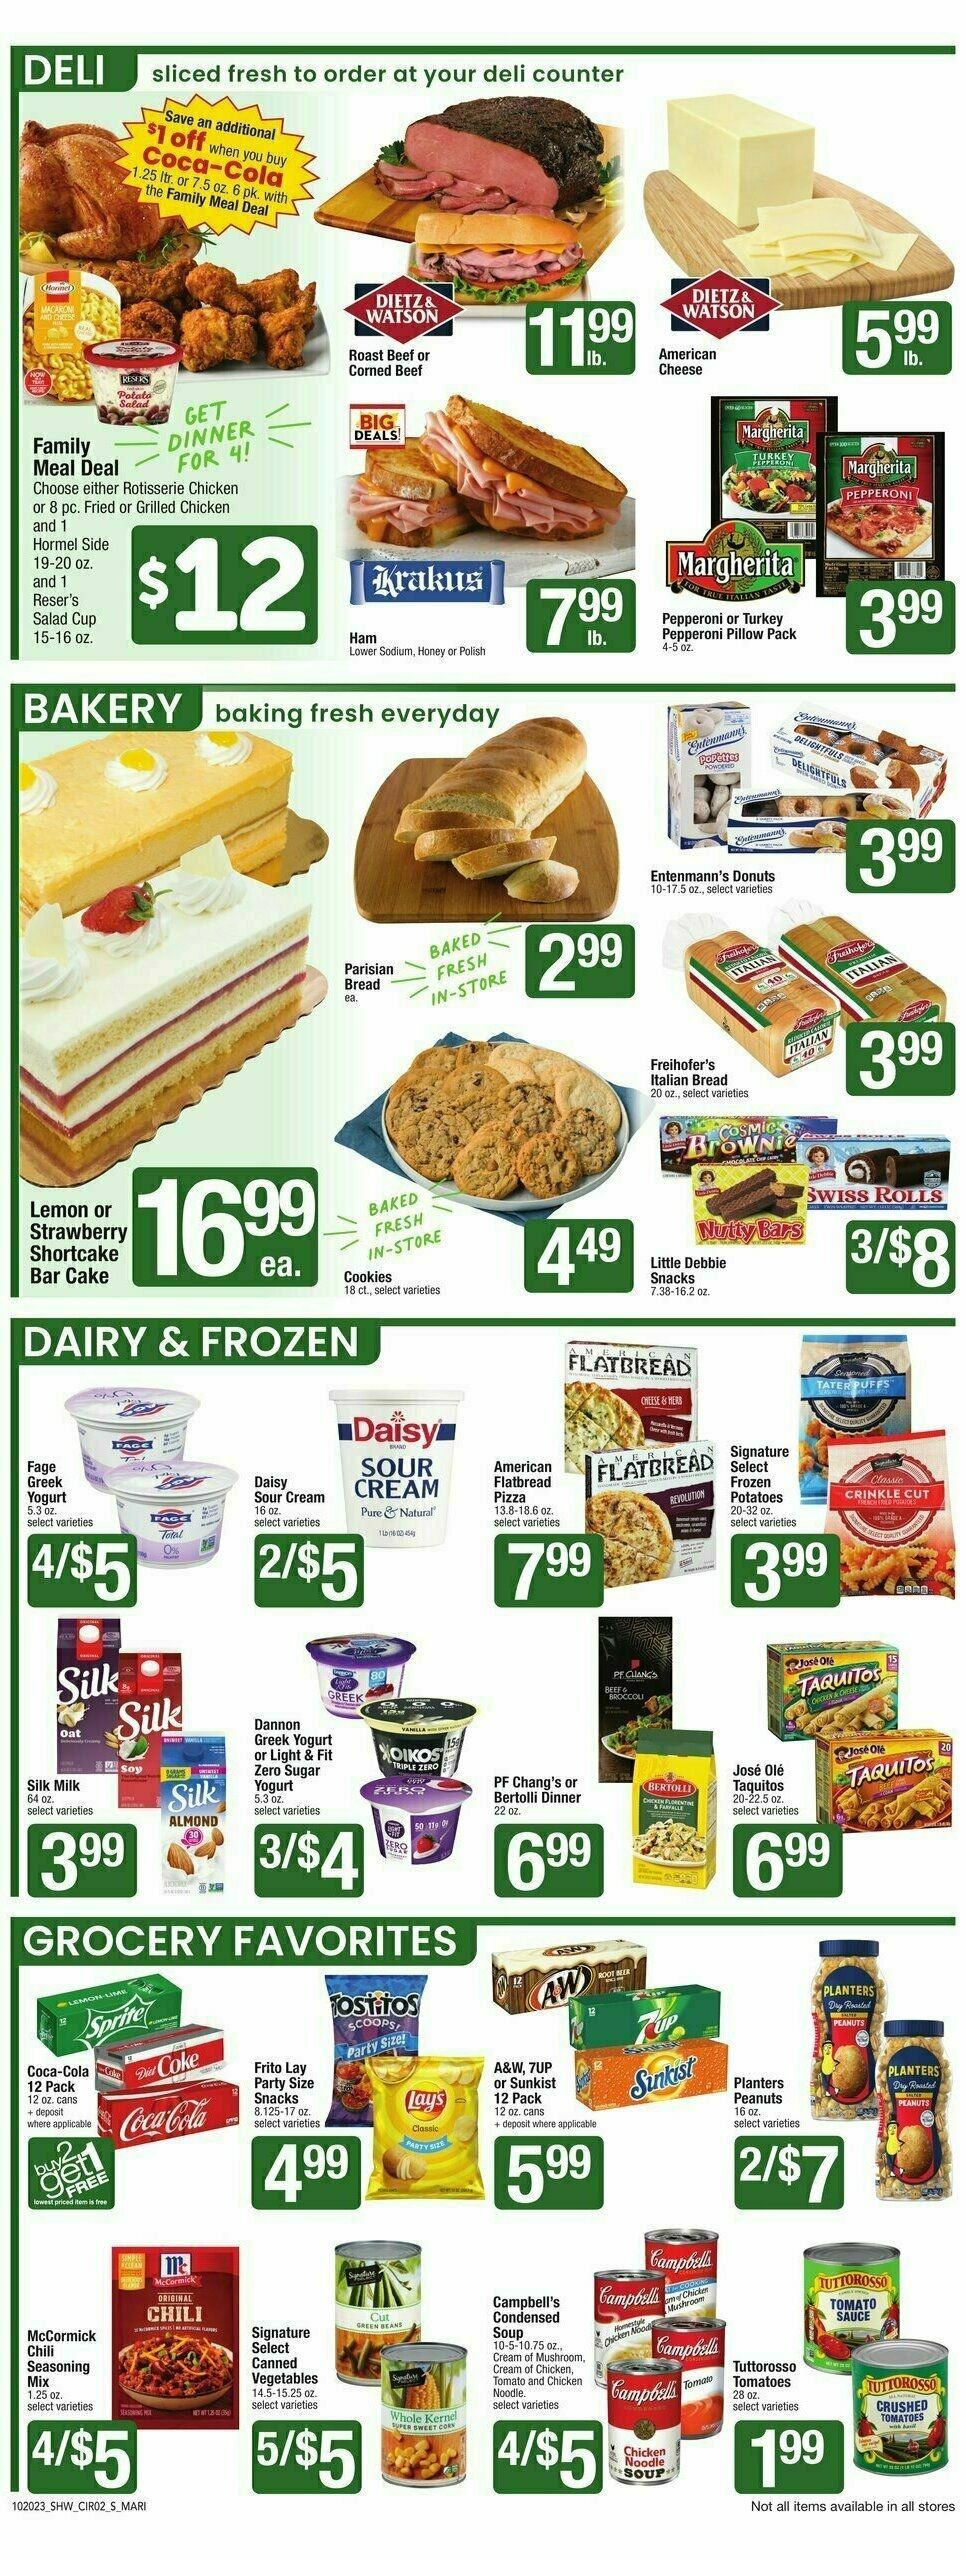 Shaw's Weekly Ad from October 20